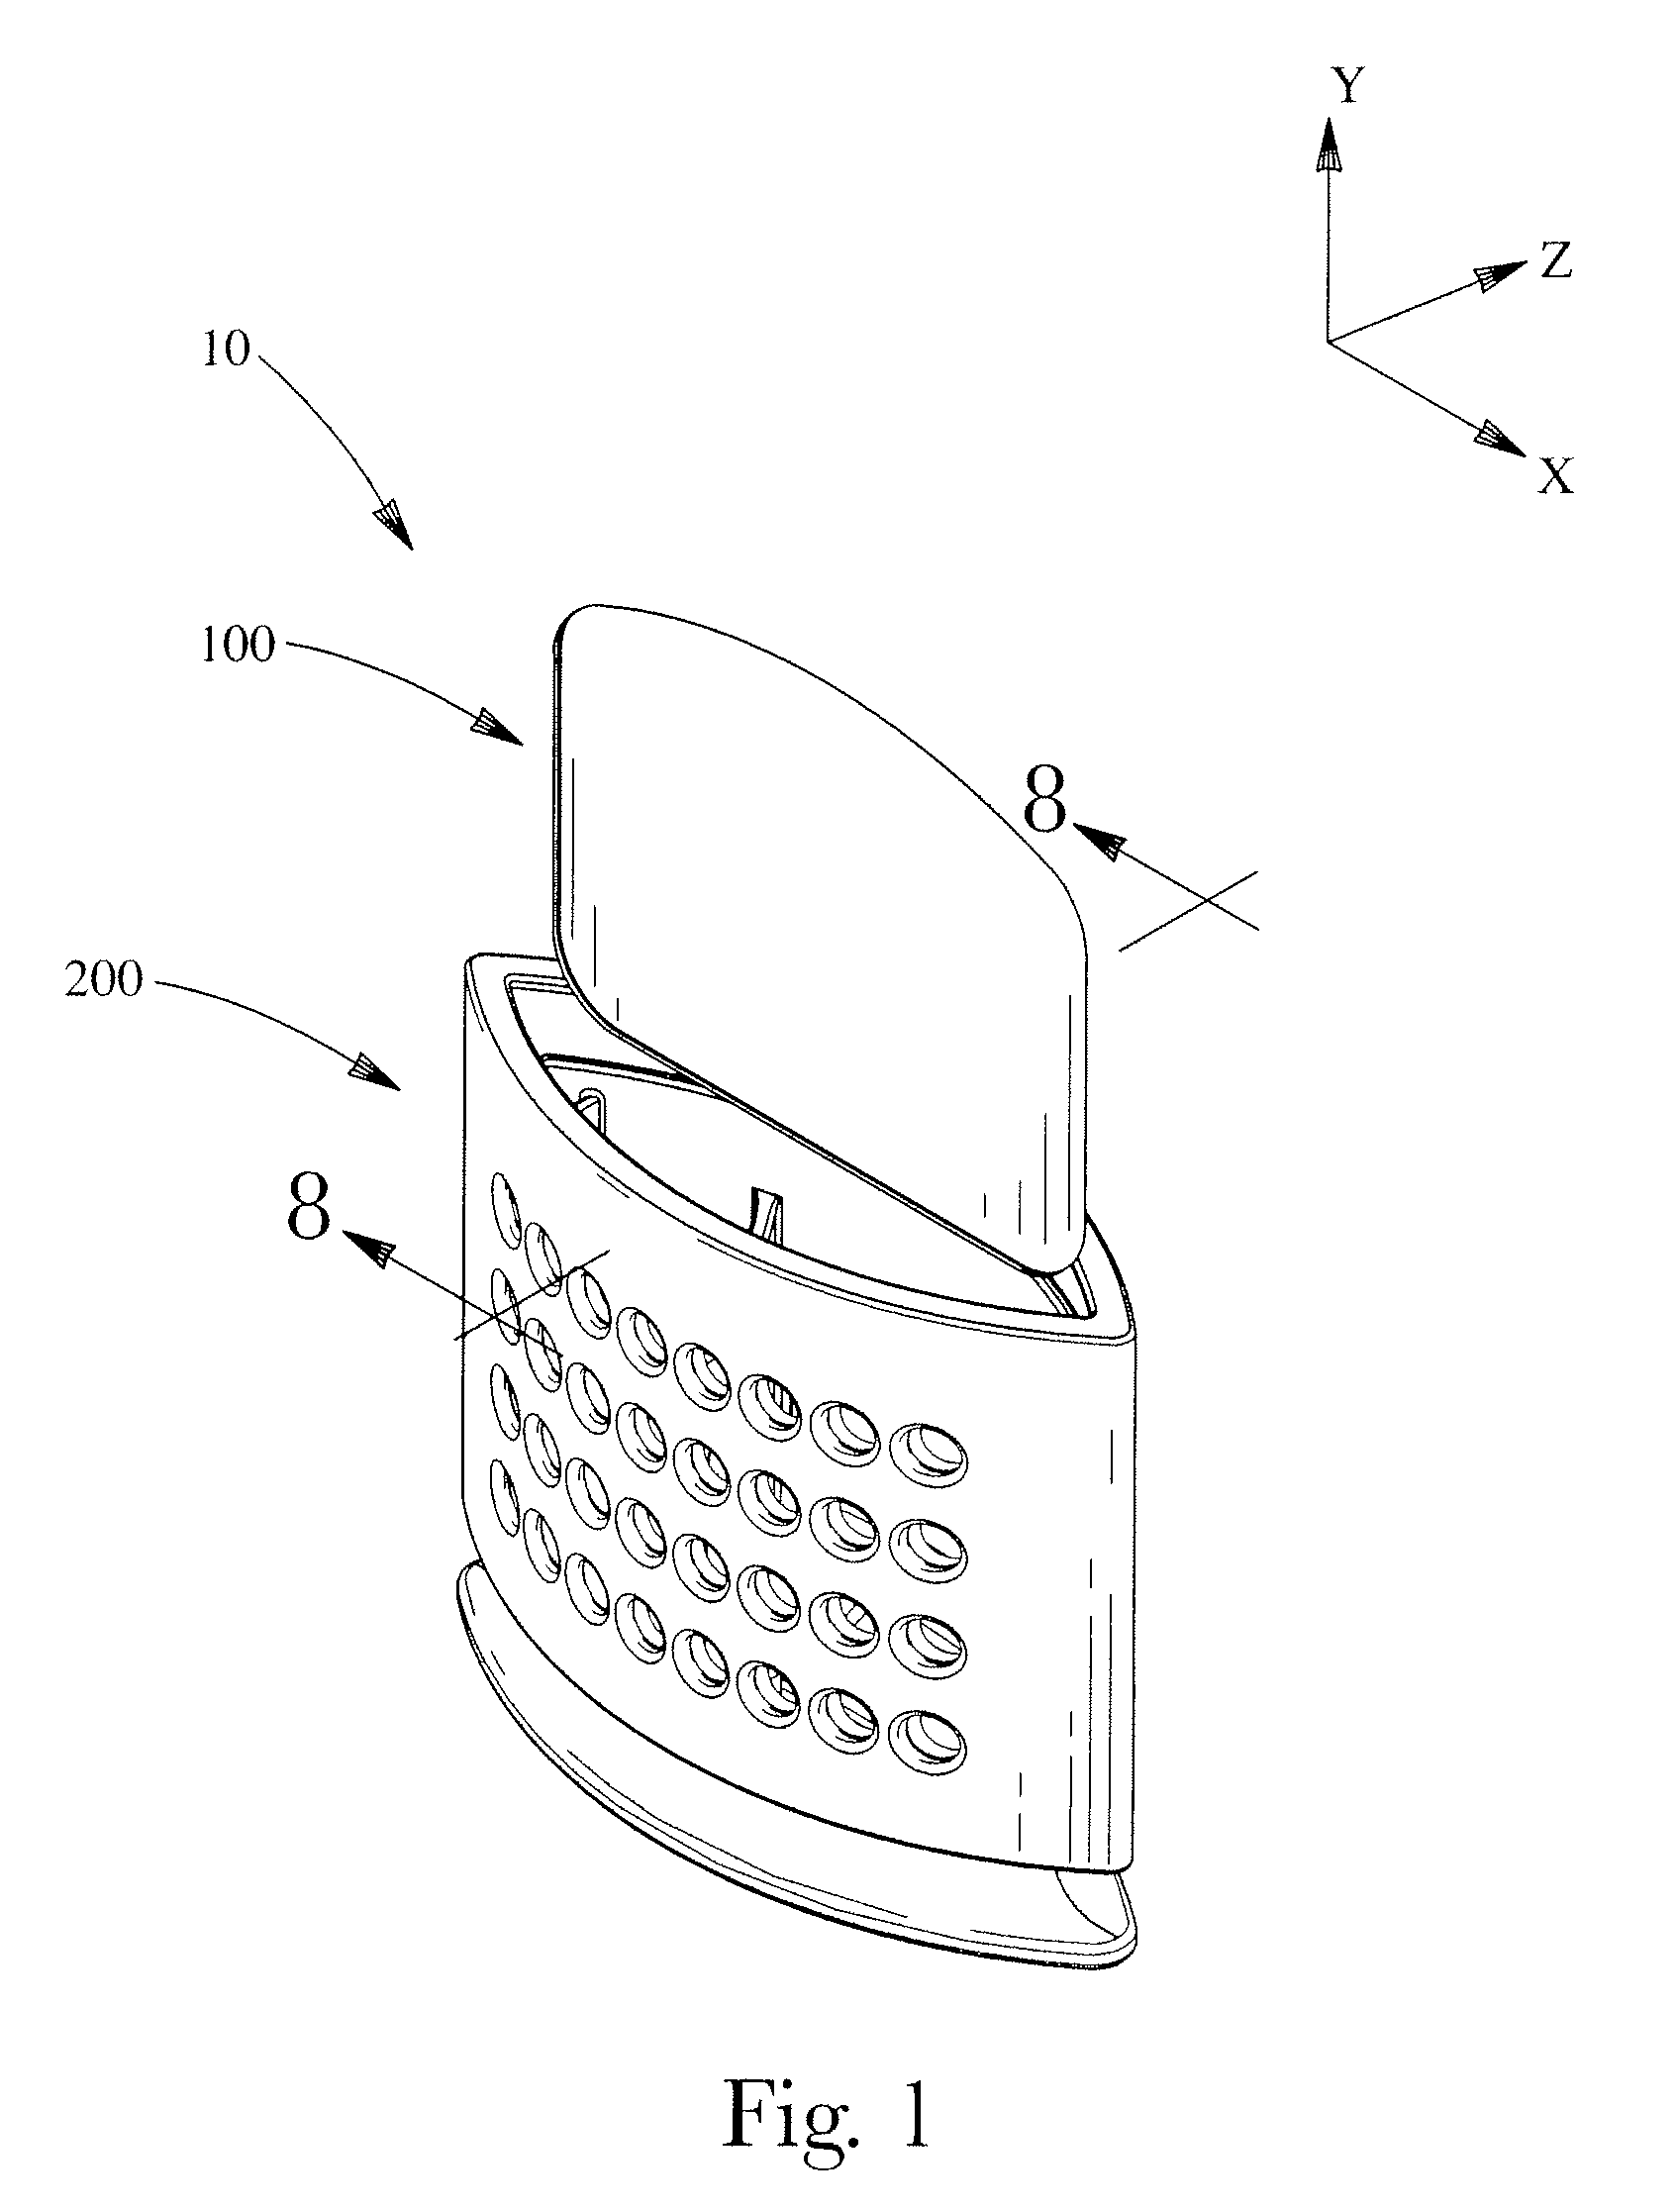 Method for delivering a volatile material